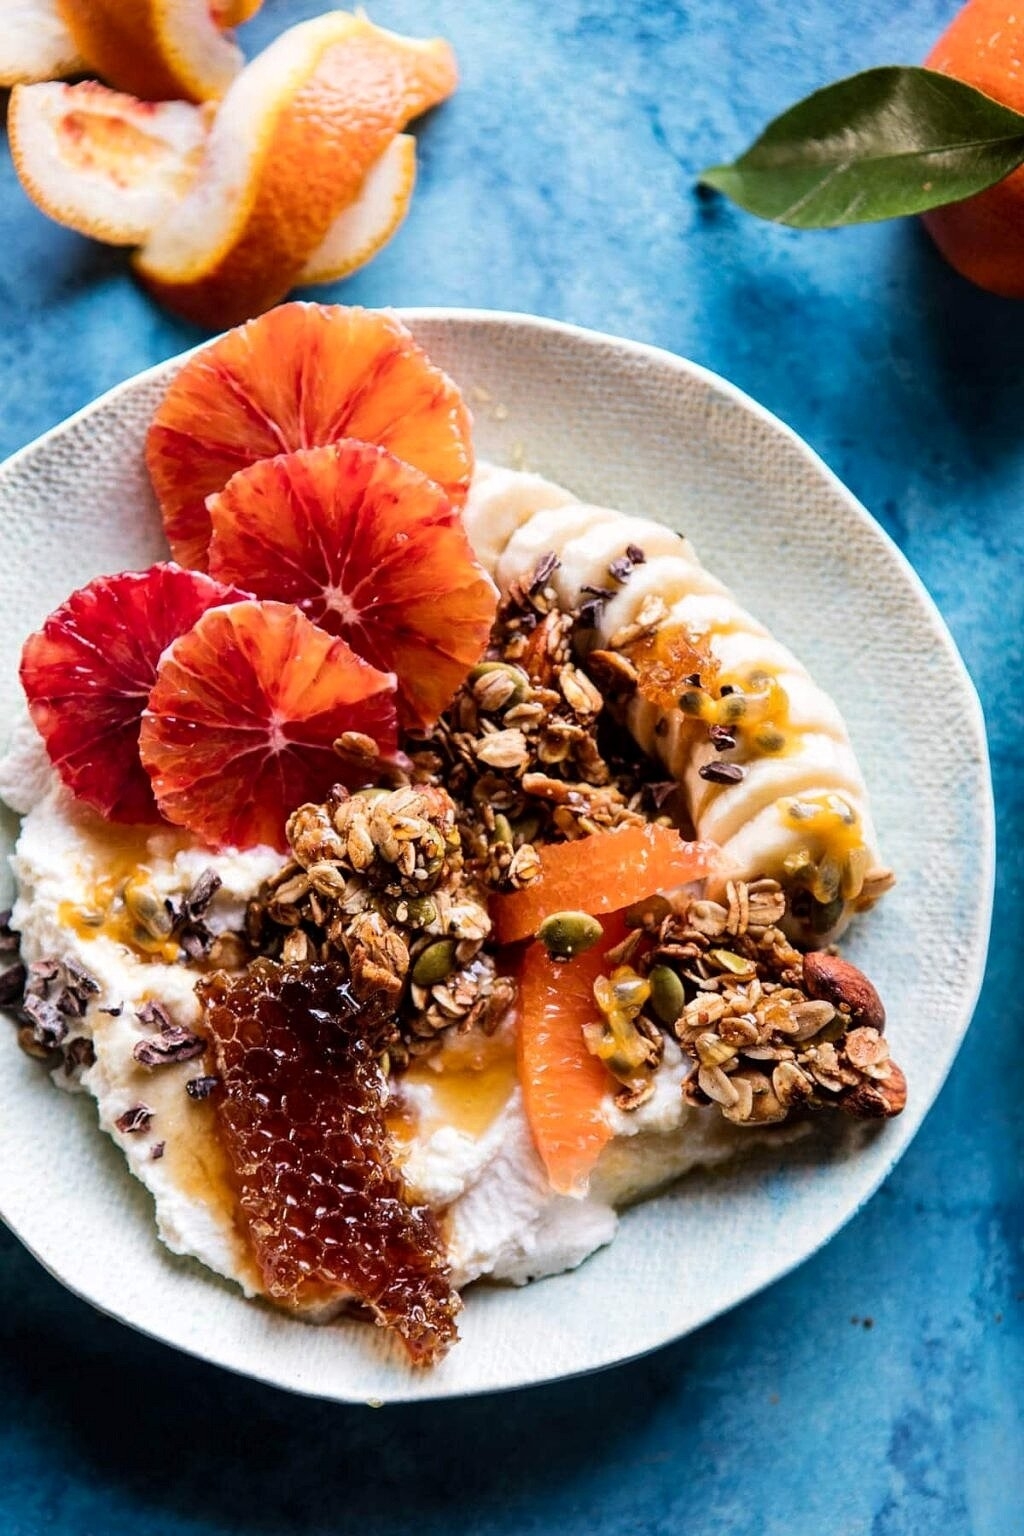 A plate with yogurt, granola, honeycomb, and slices of banana and citrus fruits